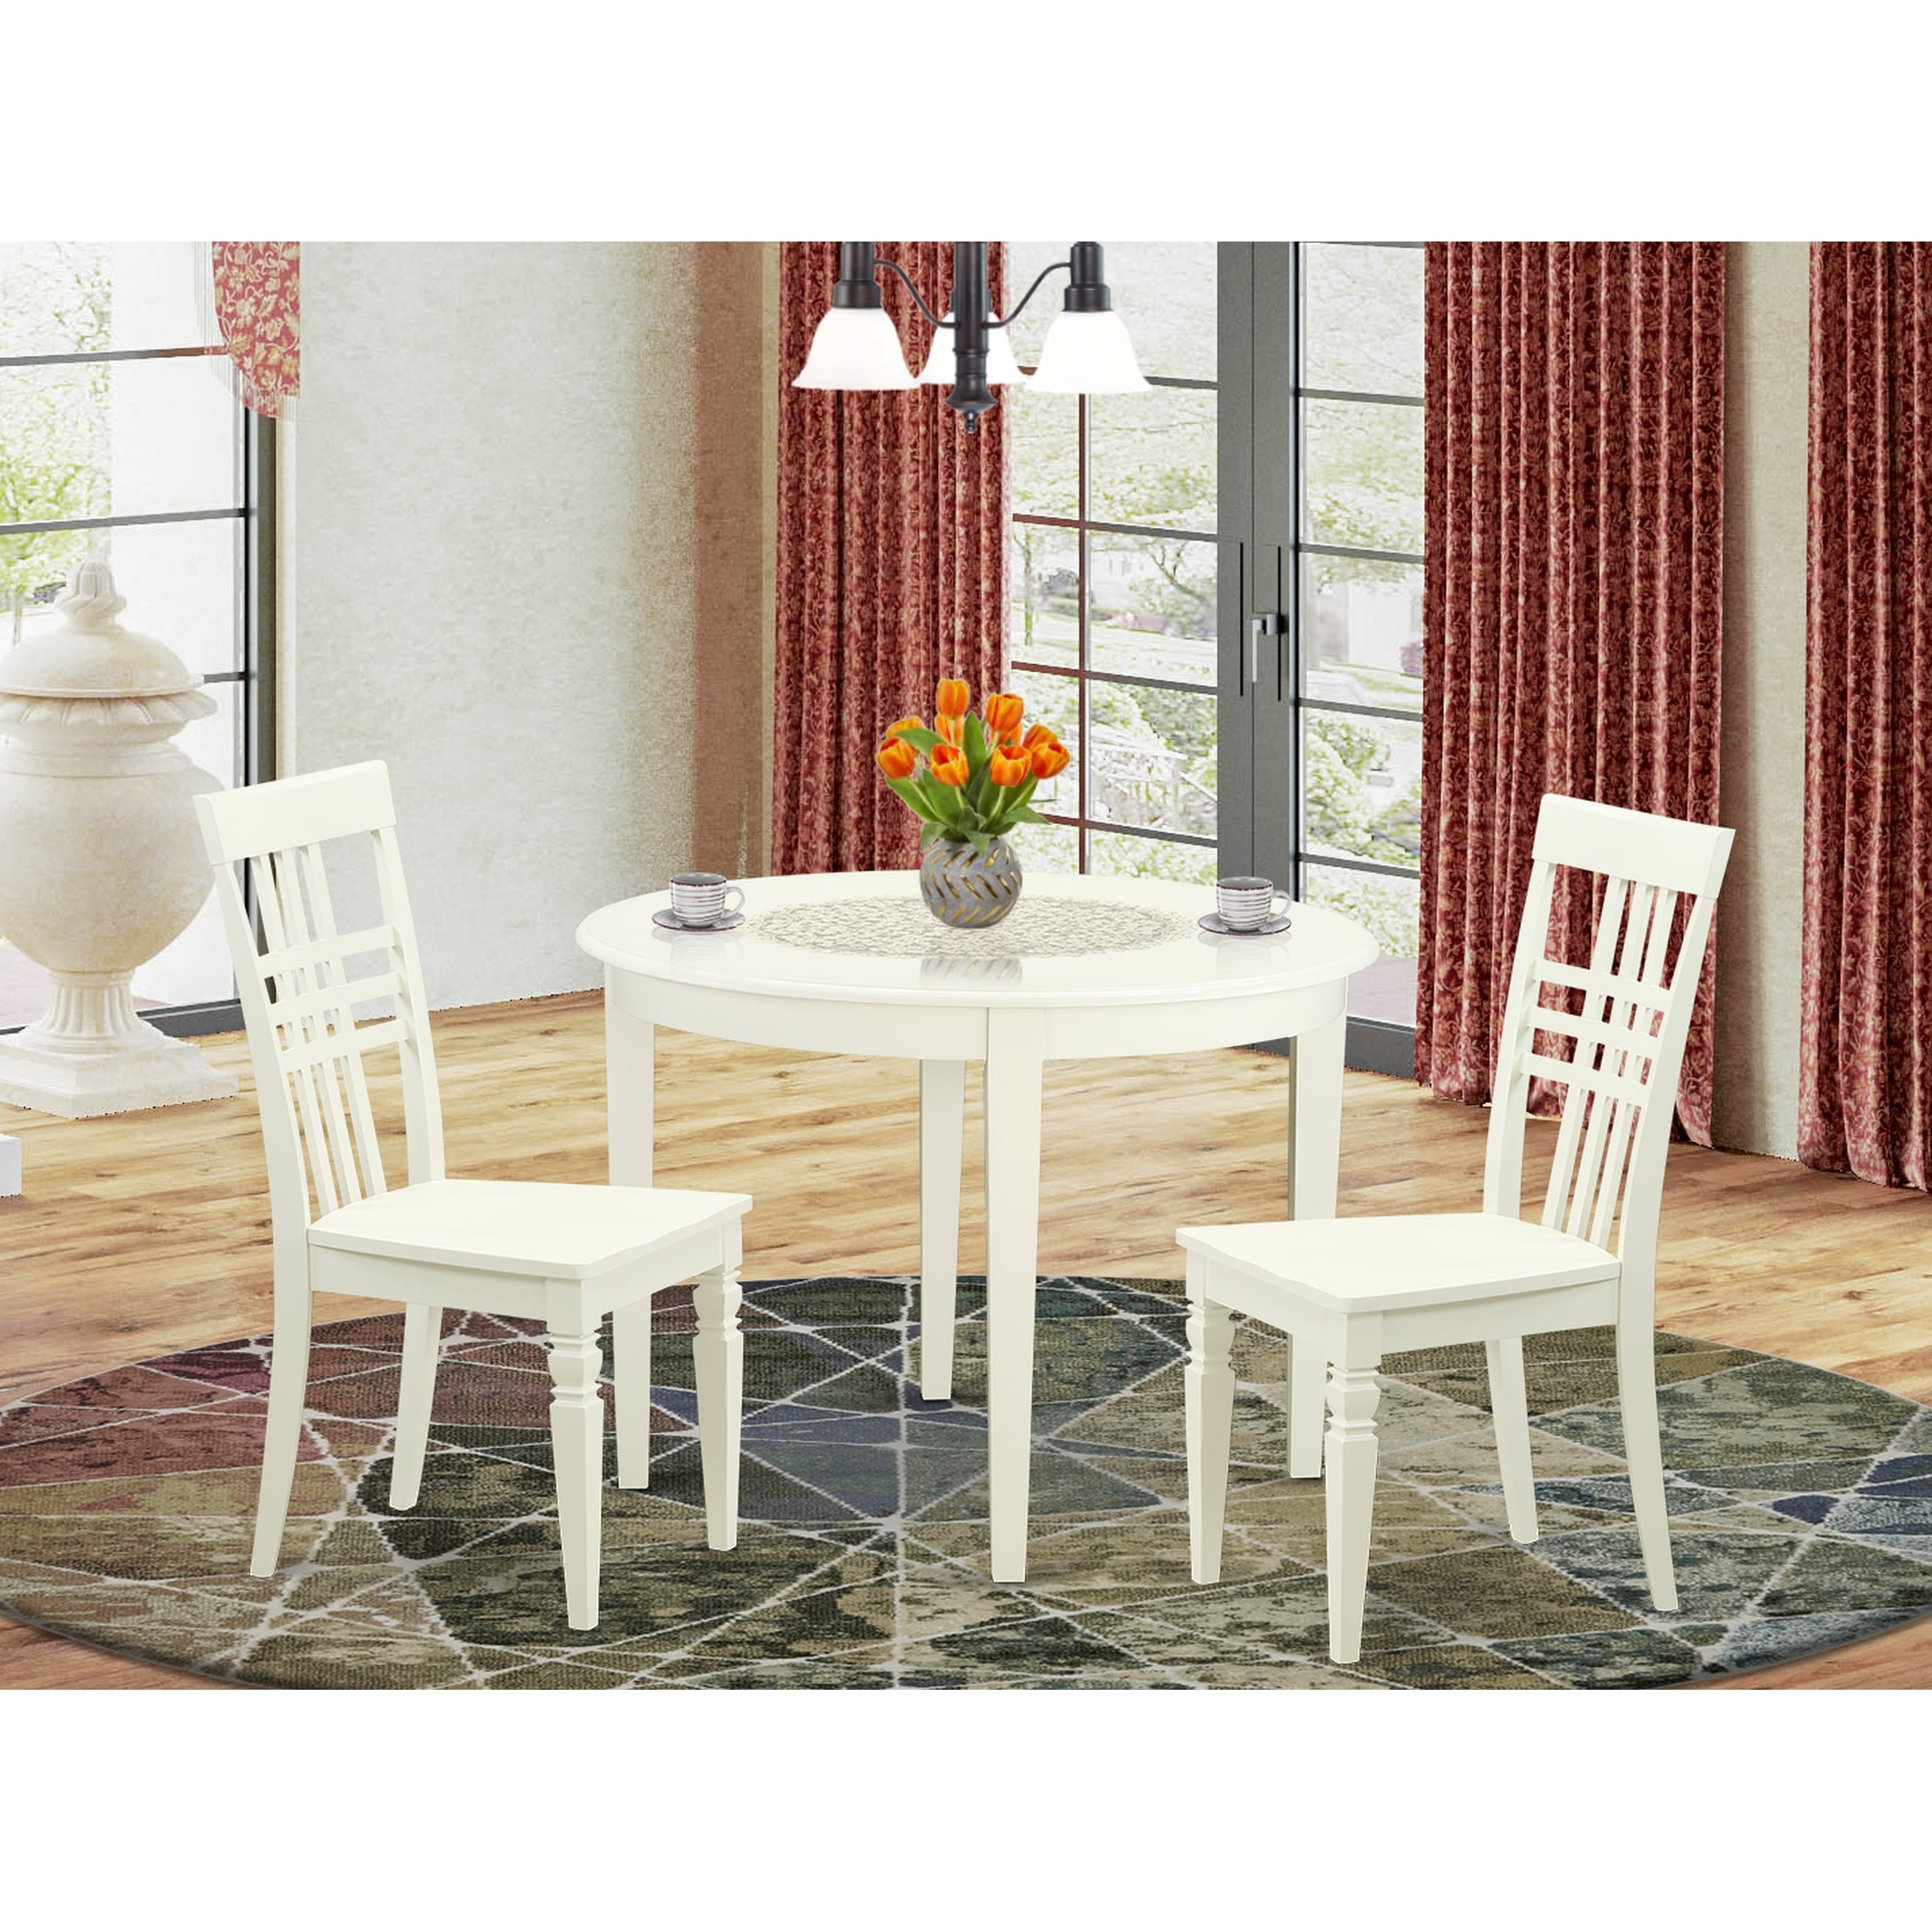 Shop Black Friday Deals On Small Kitchen Table Set In Linen White Finish Overstock 14366462